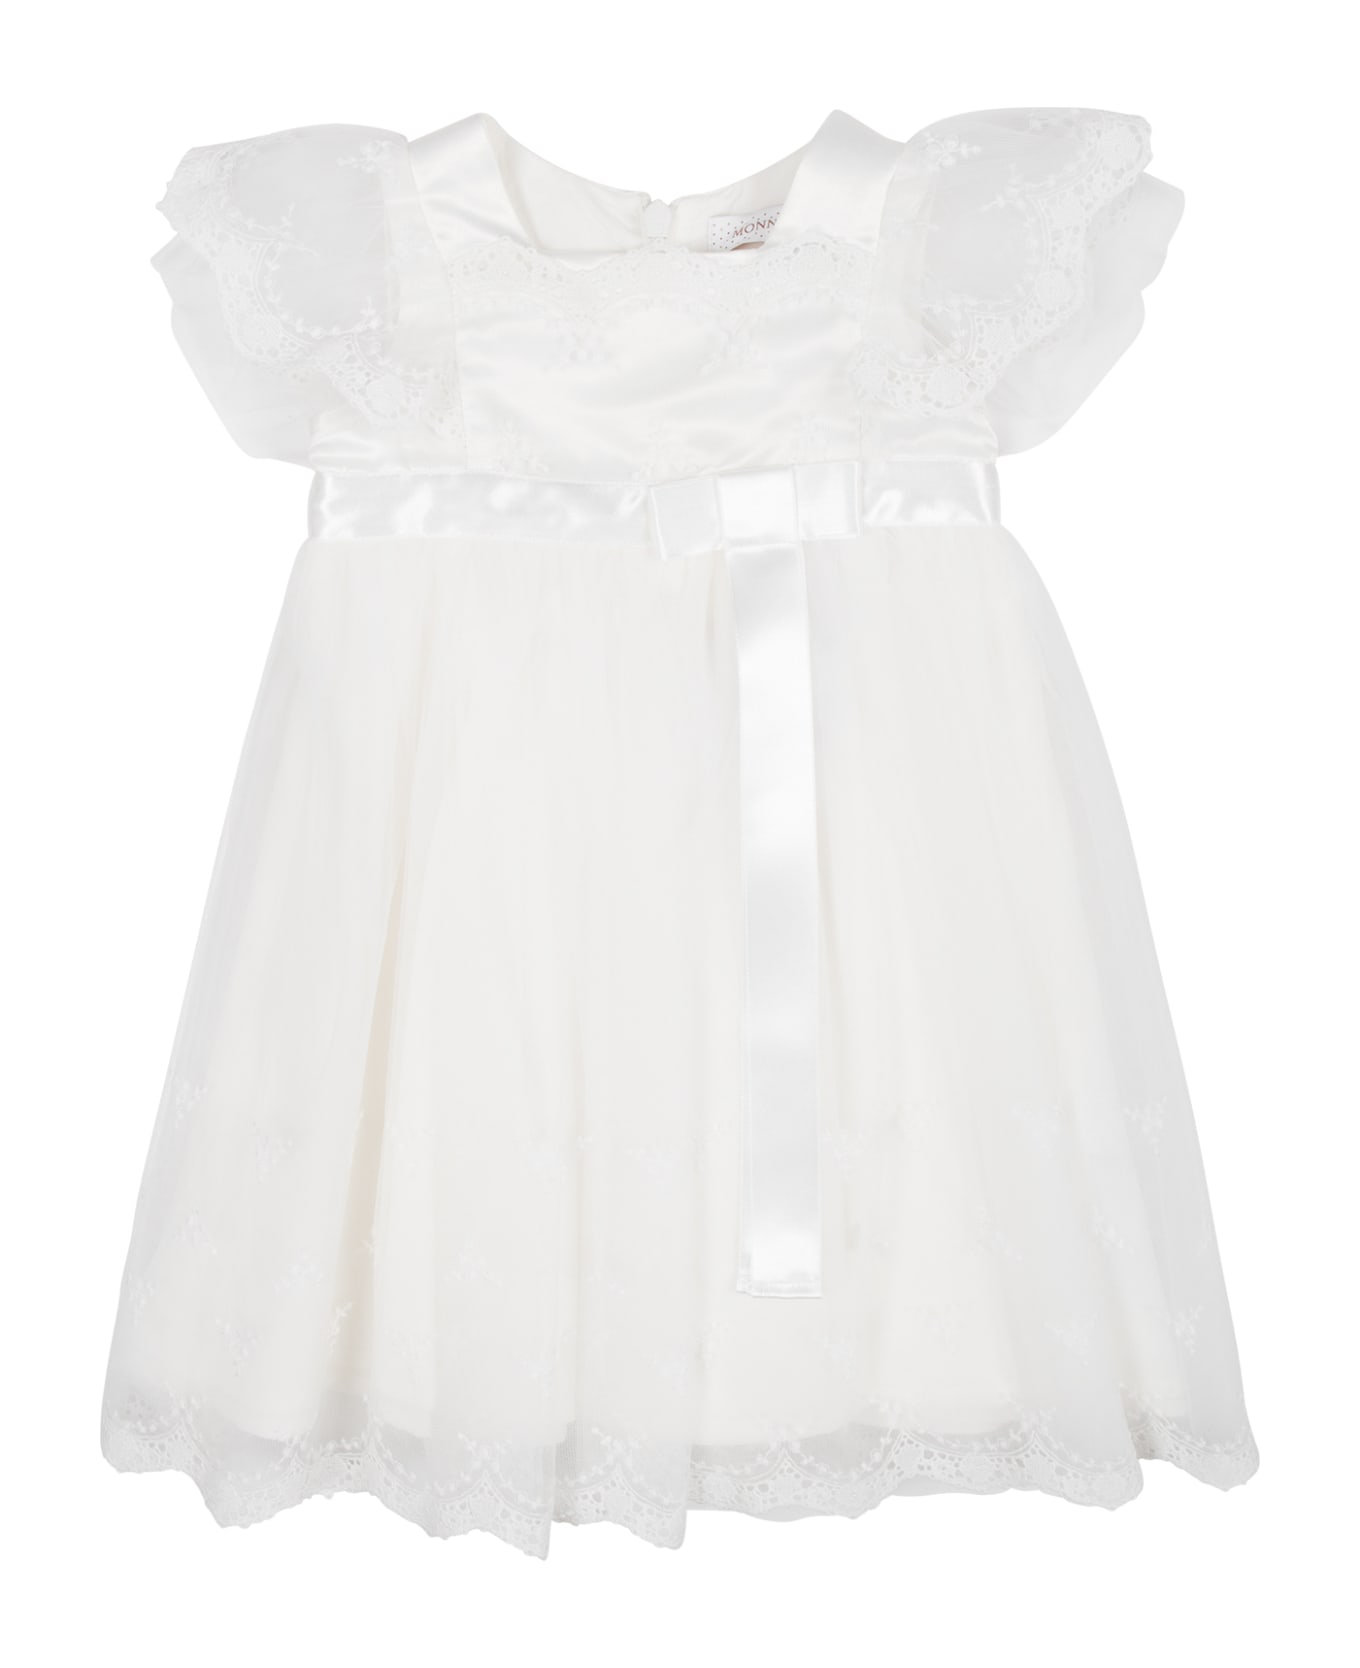 Monnalisa White Dress For Baby Girl With Embroidery And Bow - White